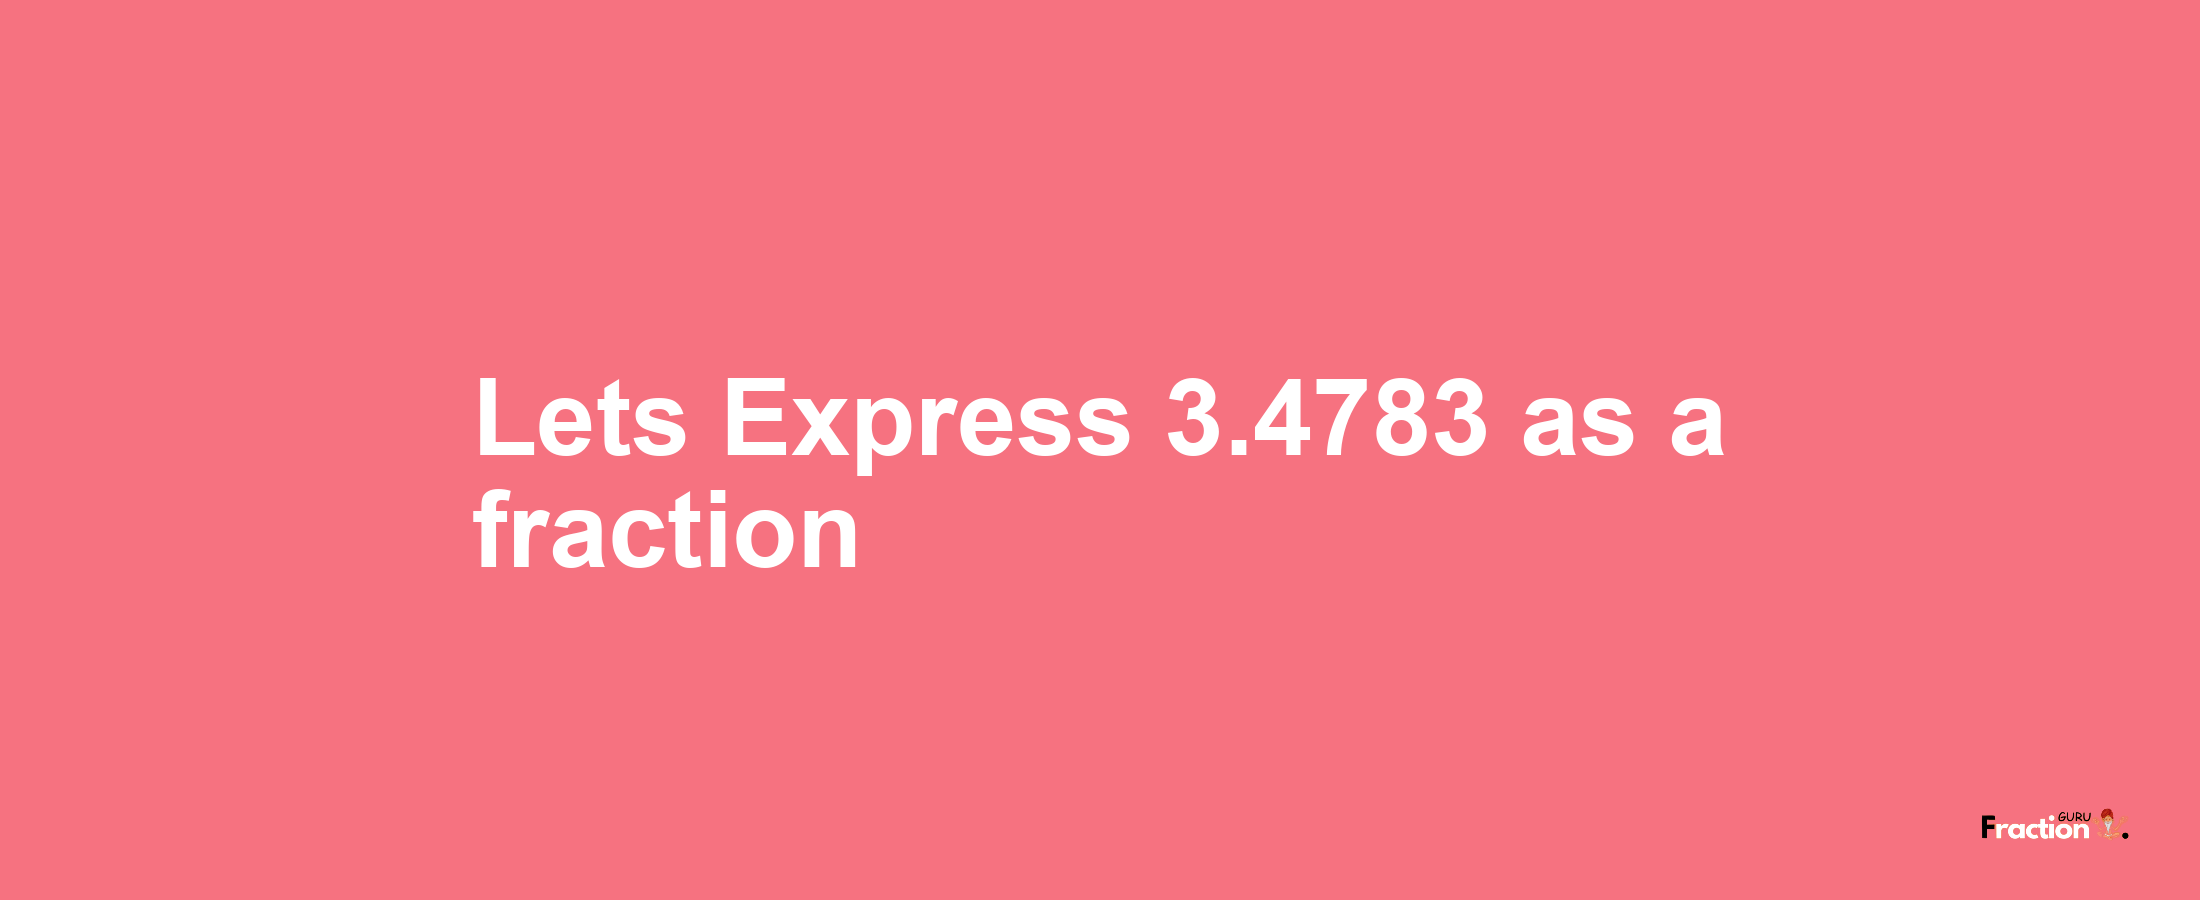 Lets Express 3.4783 as afraction